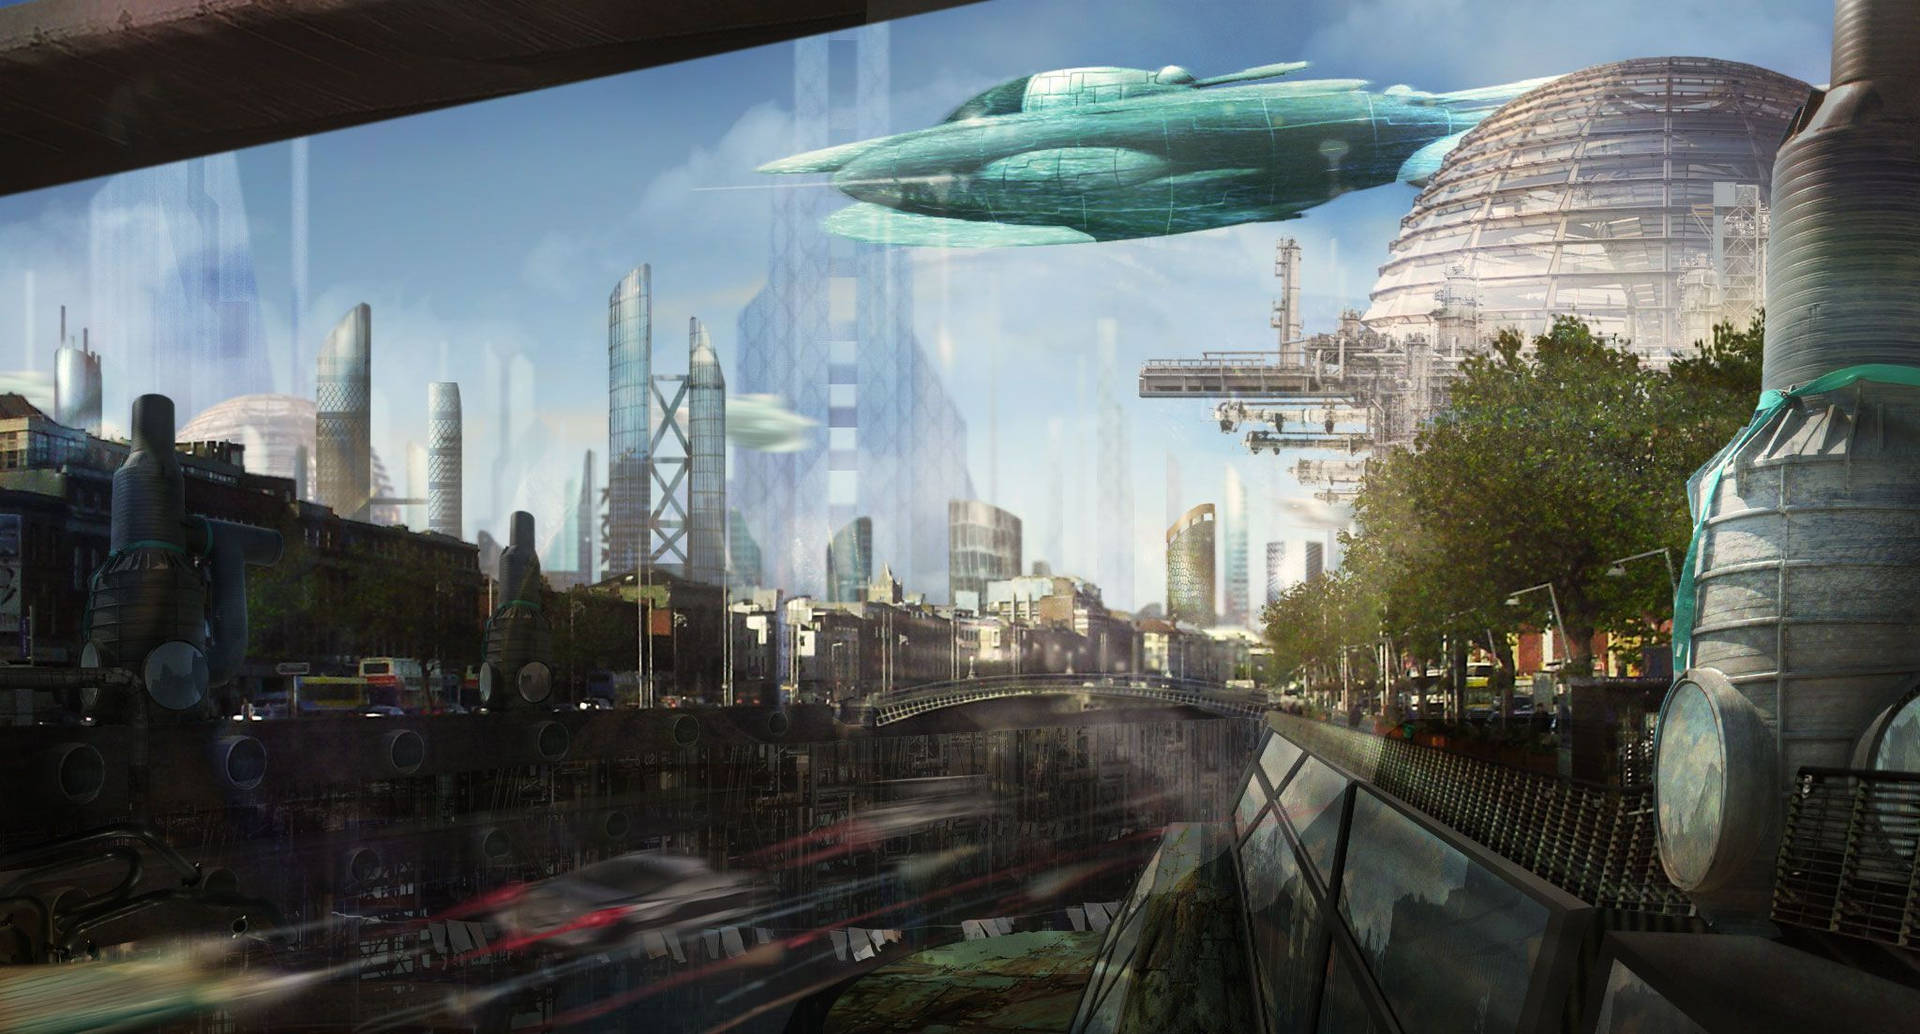 Futuristic City With Air Shuttle